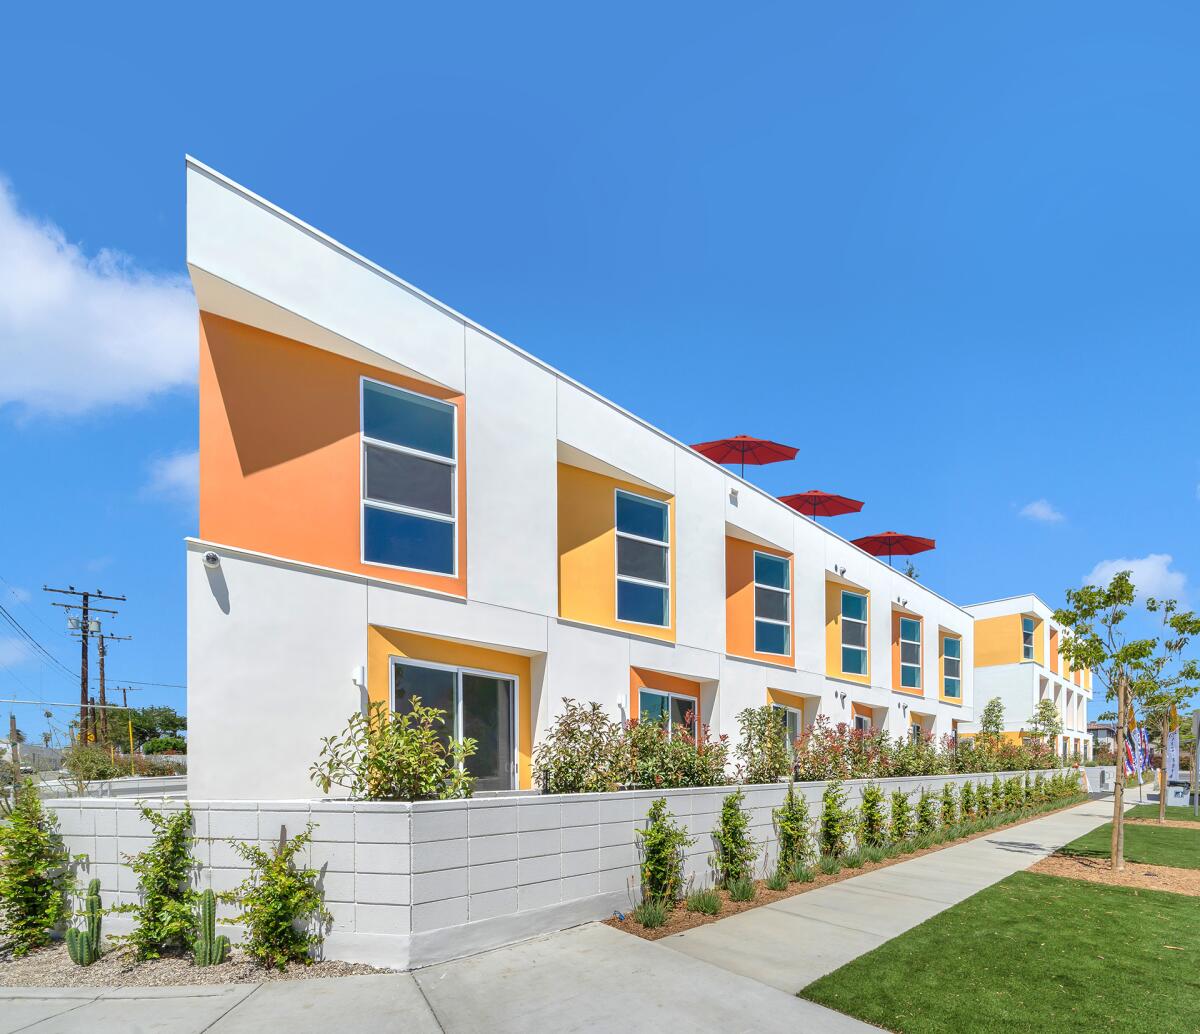 A two-story apartment complex by DE Architects features orange and yellow trim around the windows and a roof deck.